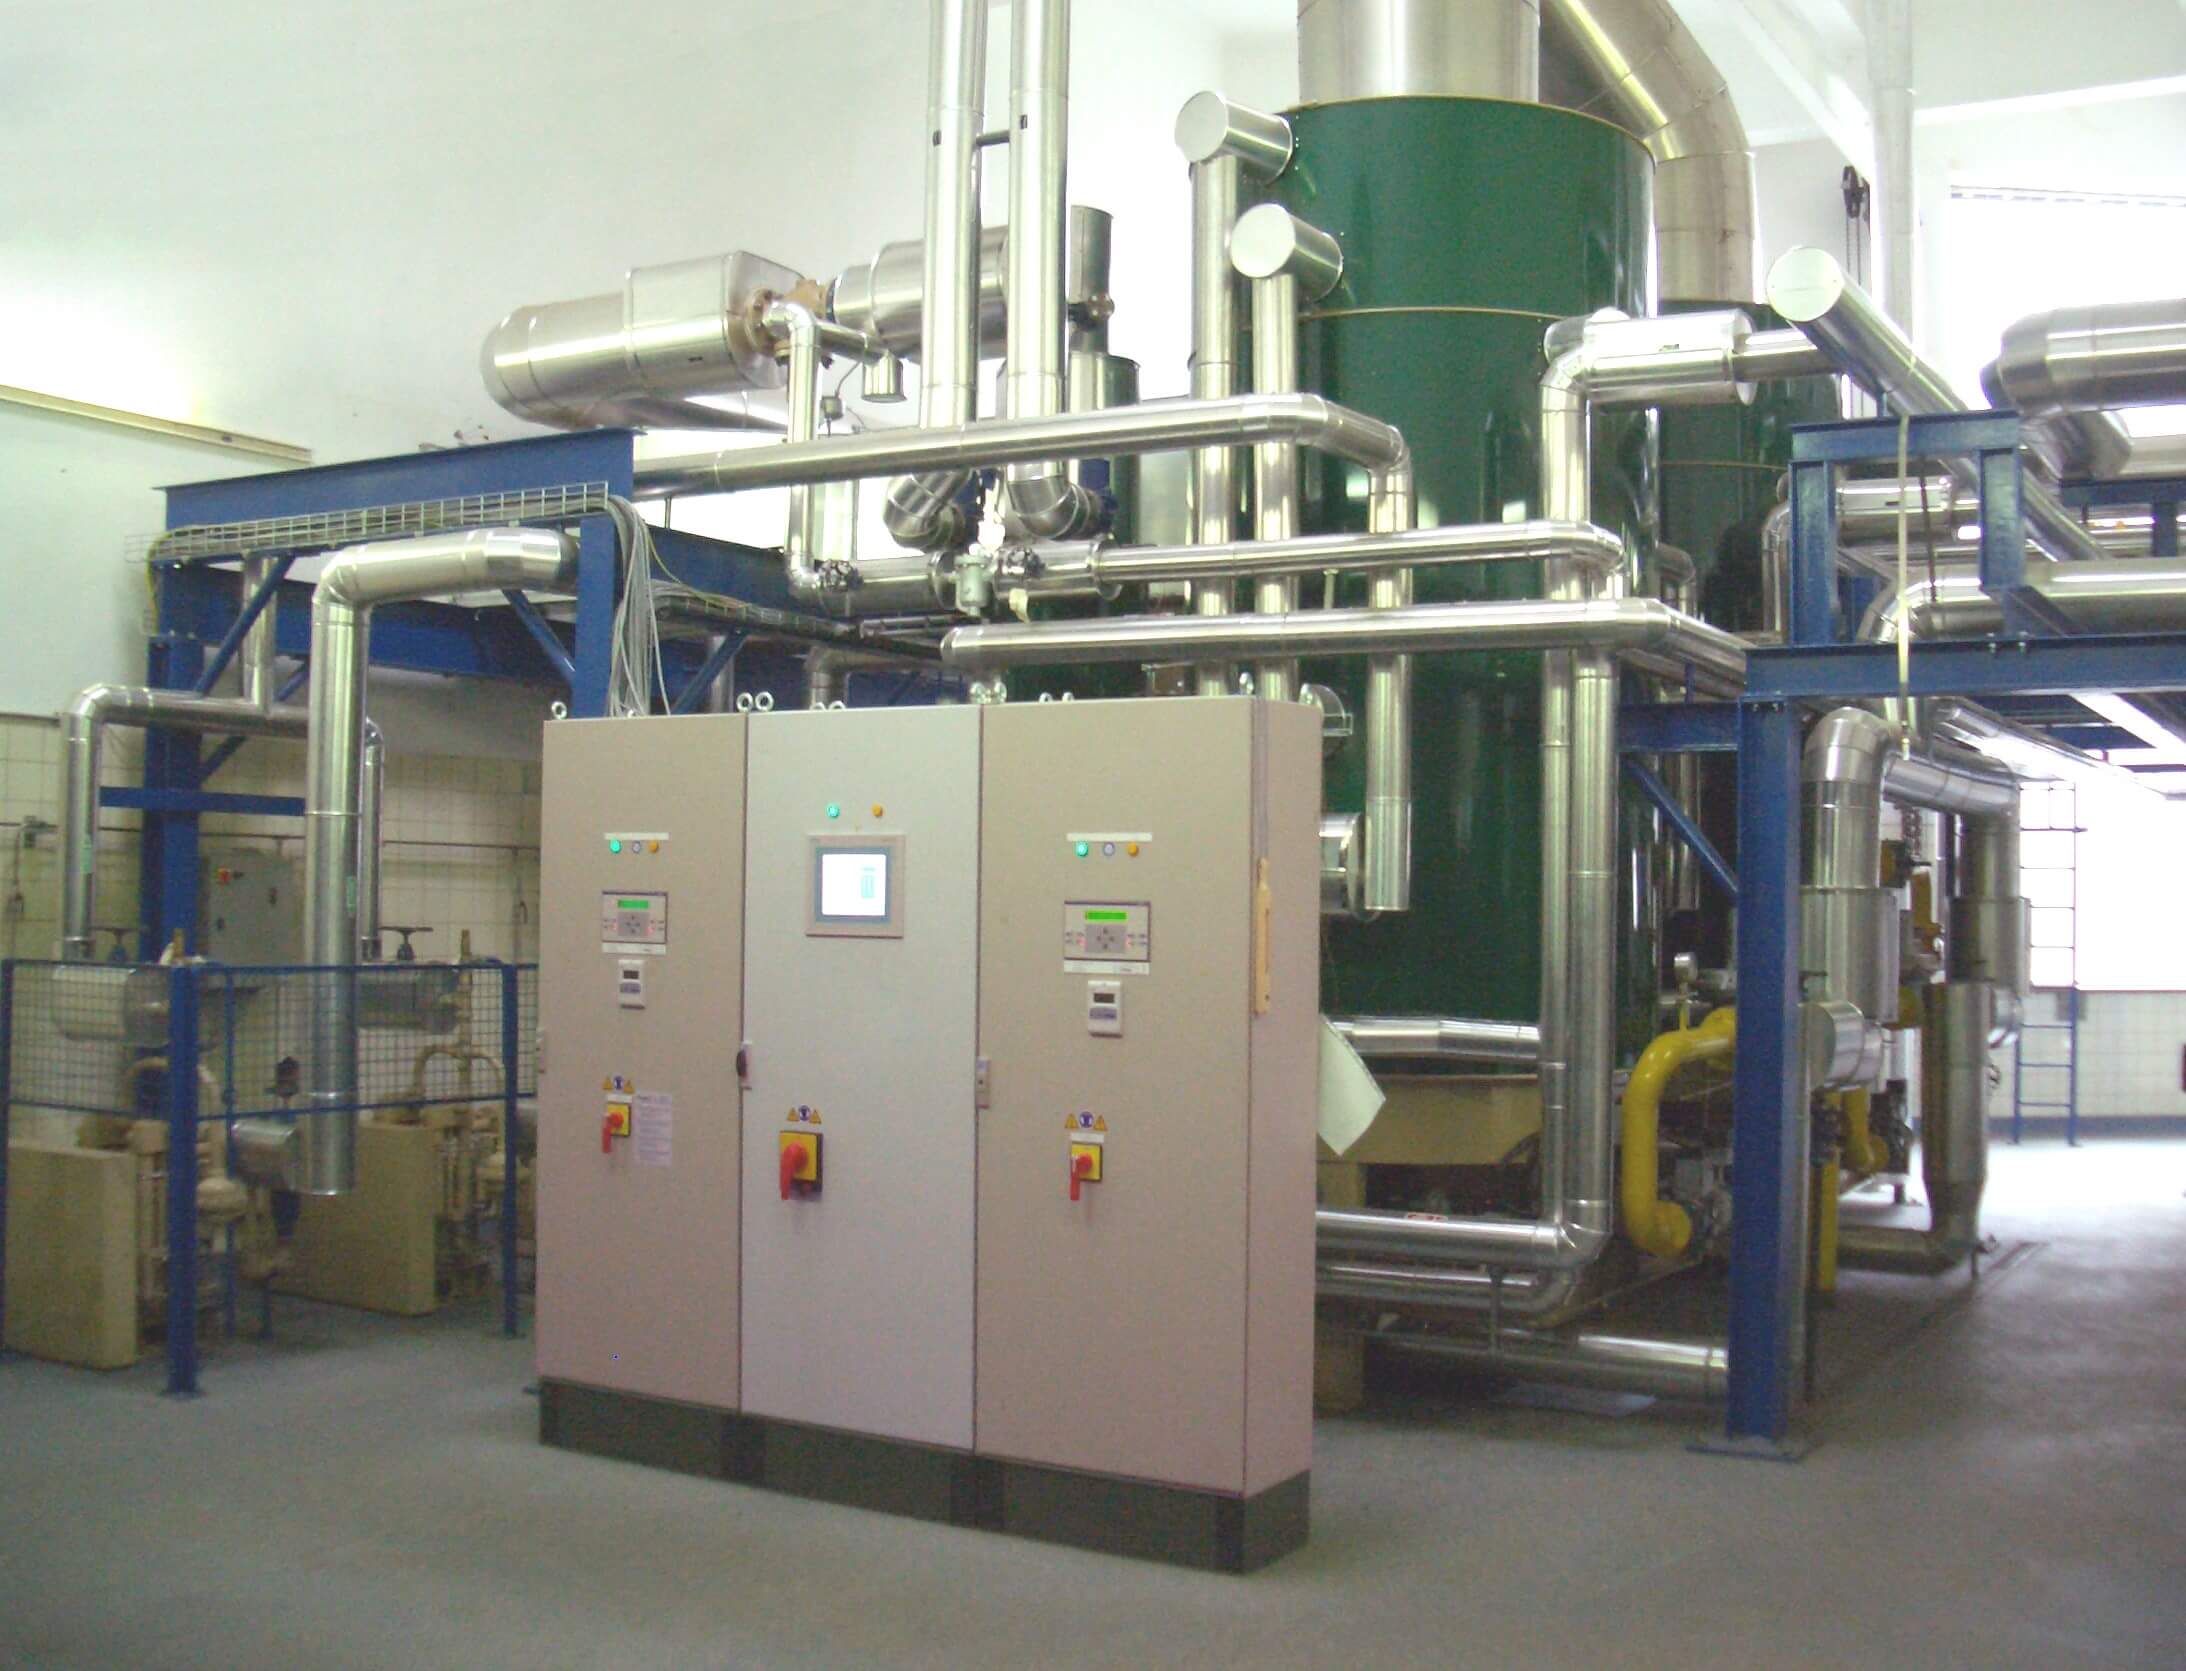 Südleder of Rehau, a Tannery in Germany now uses a Clayton Steam Generator